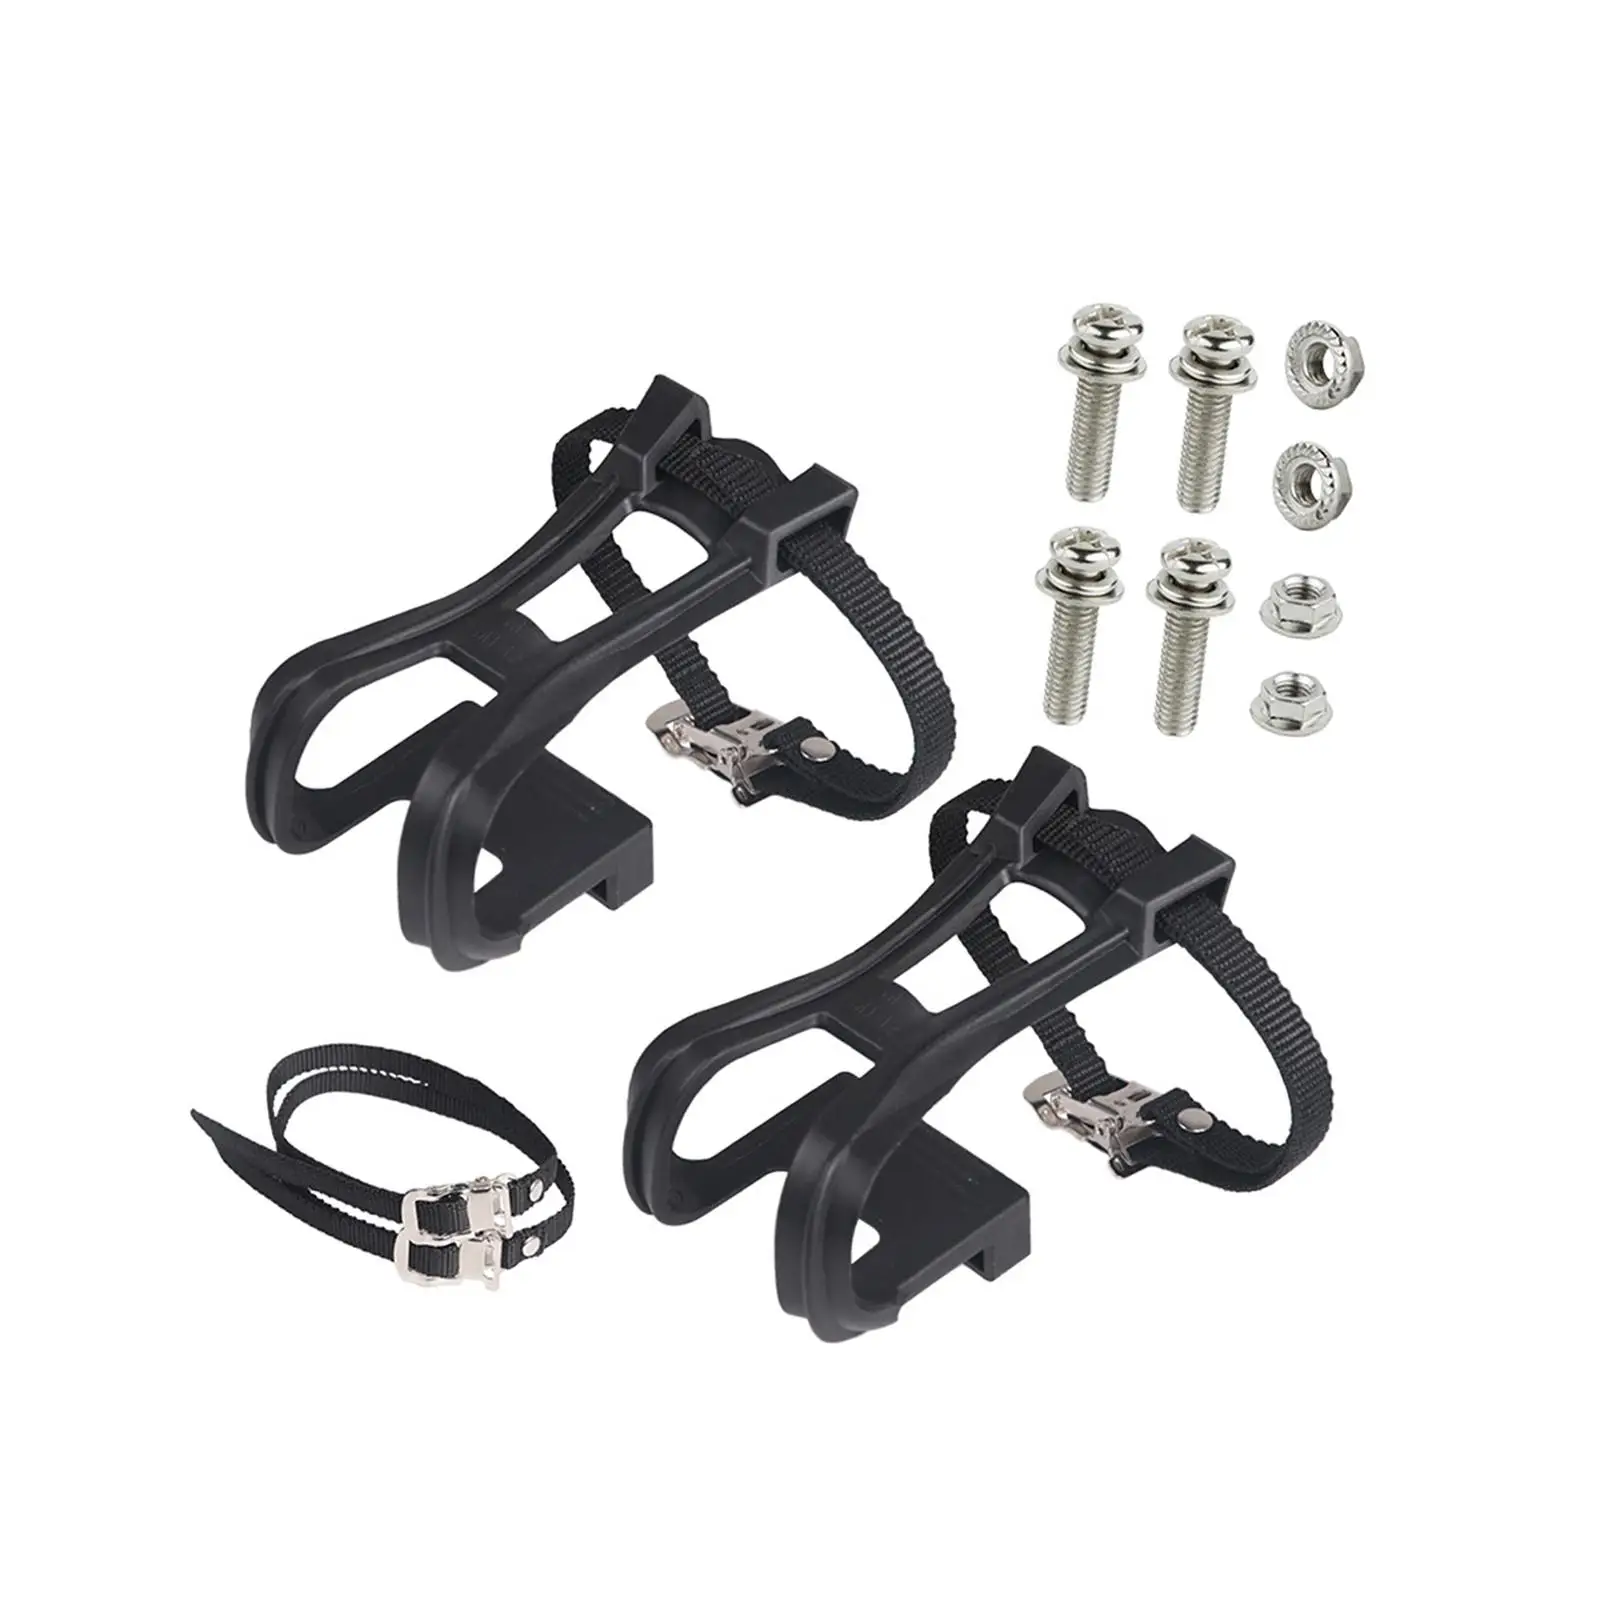 Bike Pedal Straps Footrest Strips for Outdoor Mountain Bikes